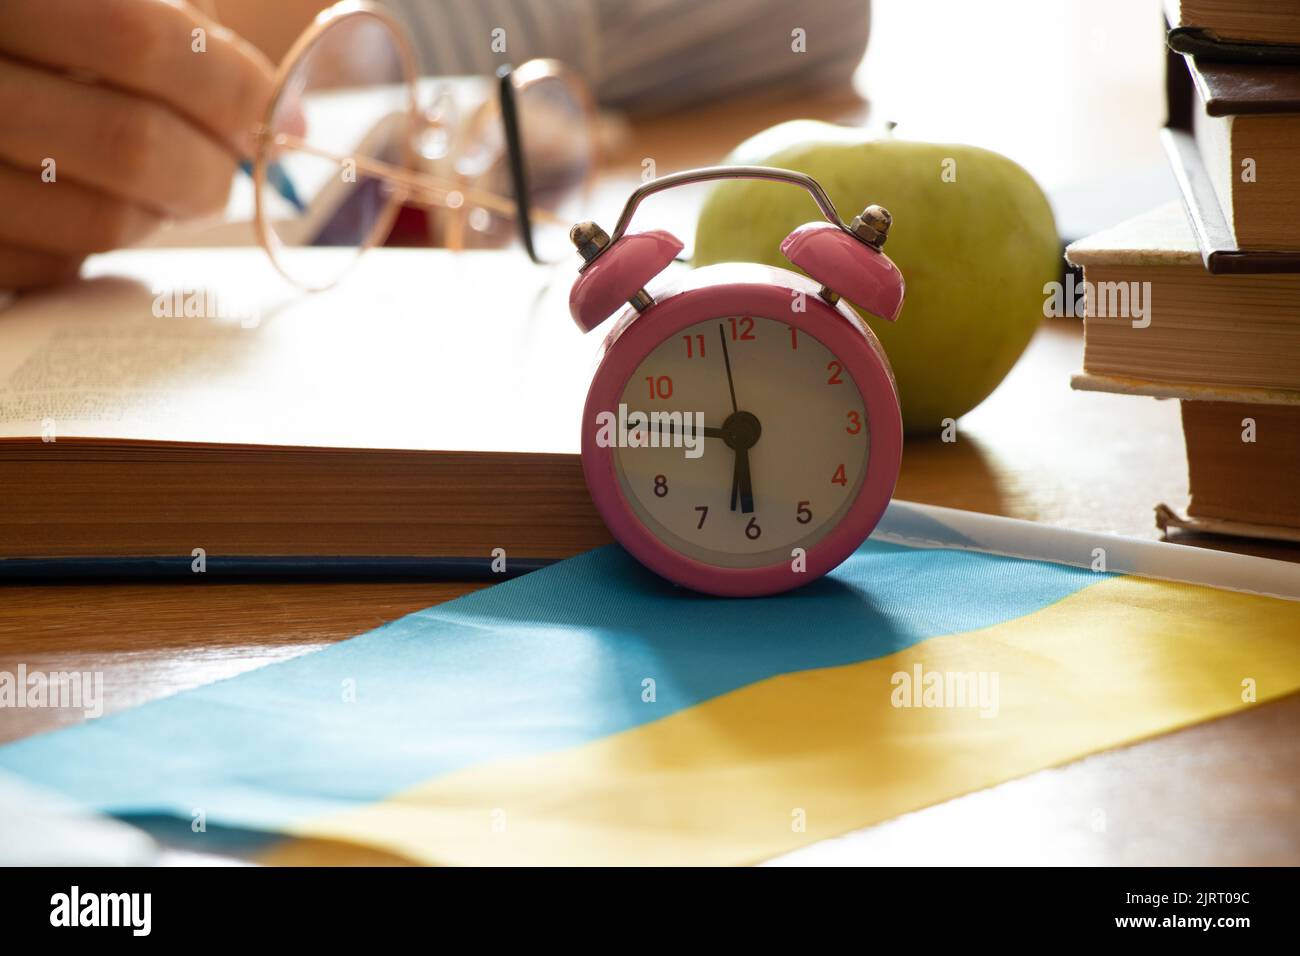 An alarm clock stands on a table near books and an apple on the flags of Ukraine, school education in Ukraine, time to study, education in Ukraine Stock Photo